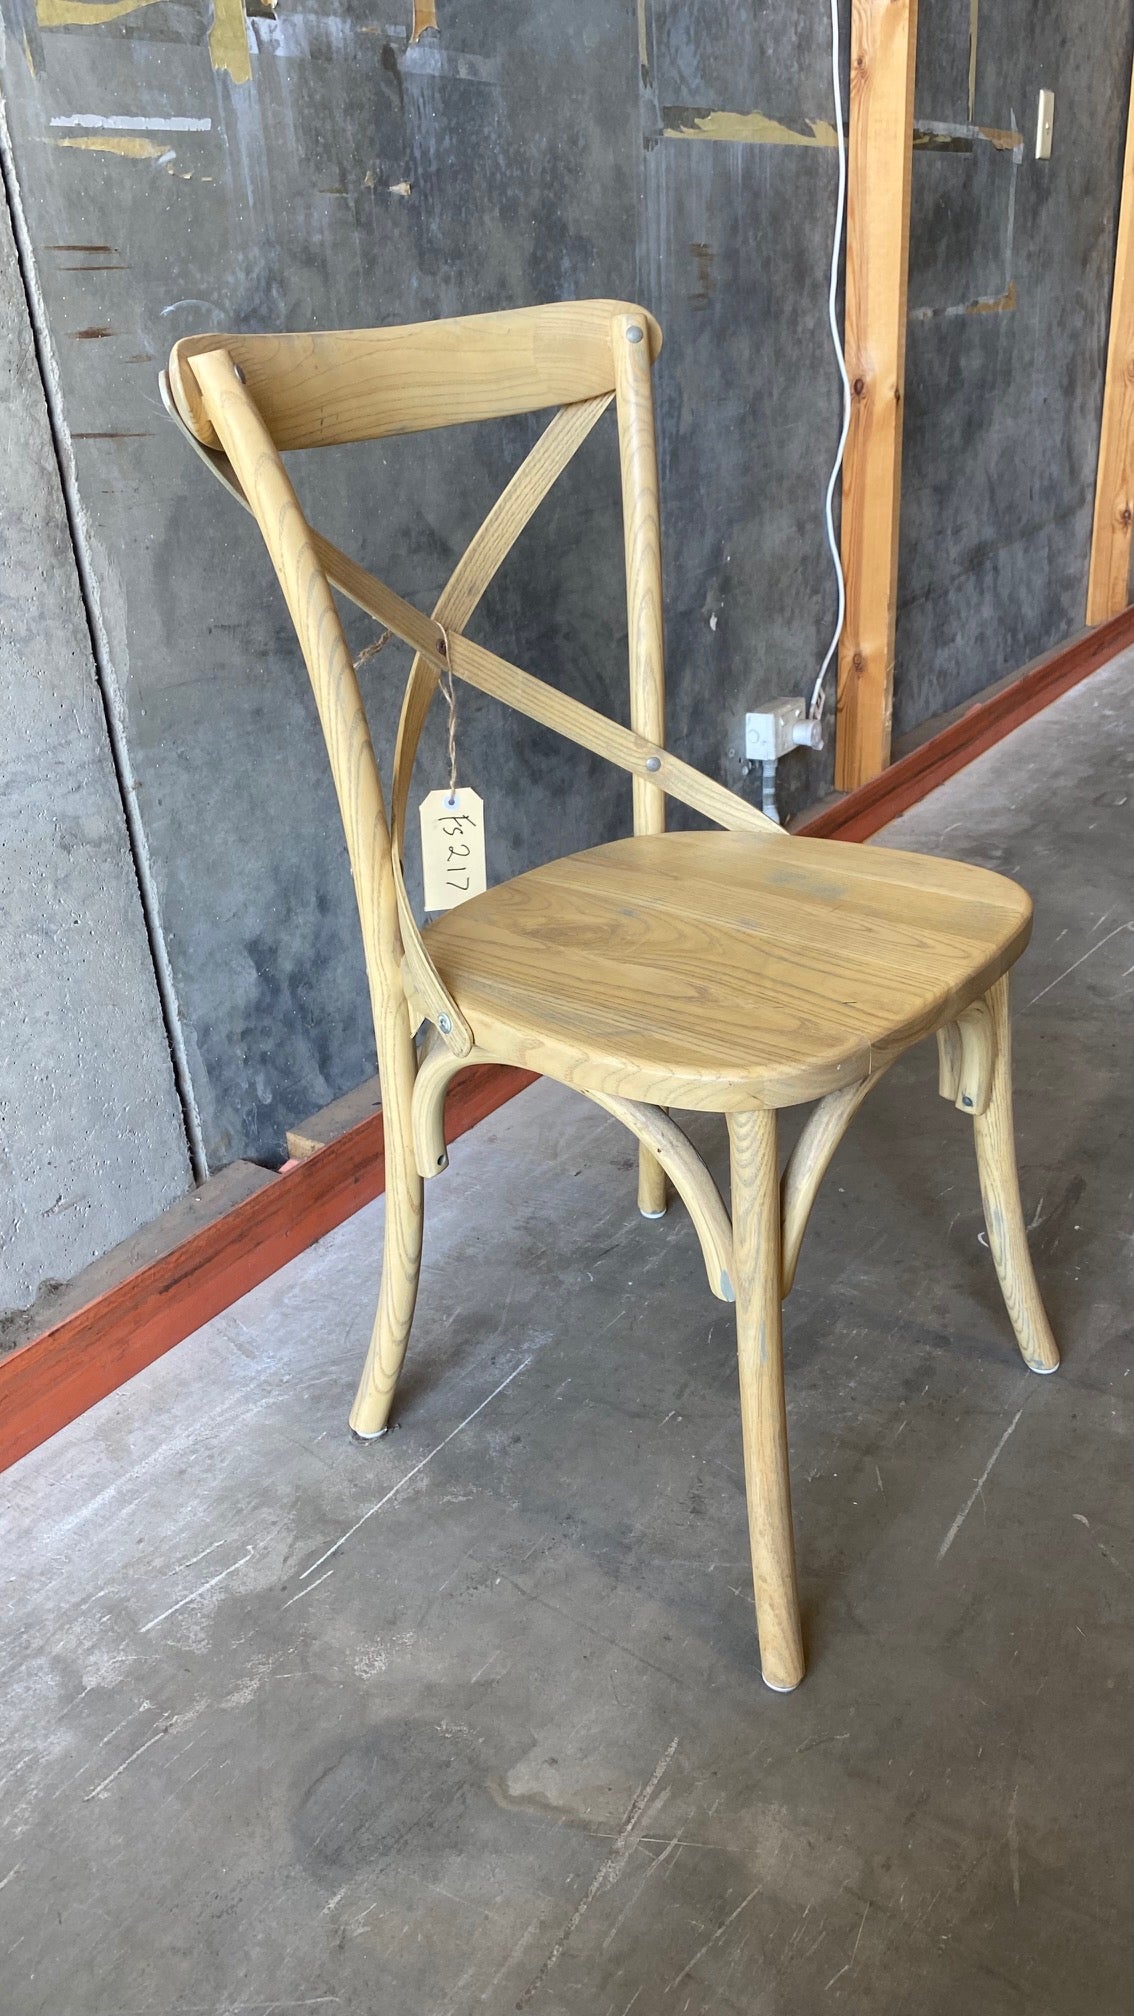 Factory Second - Blonde - Cross Back Chair with timber seat (Single)